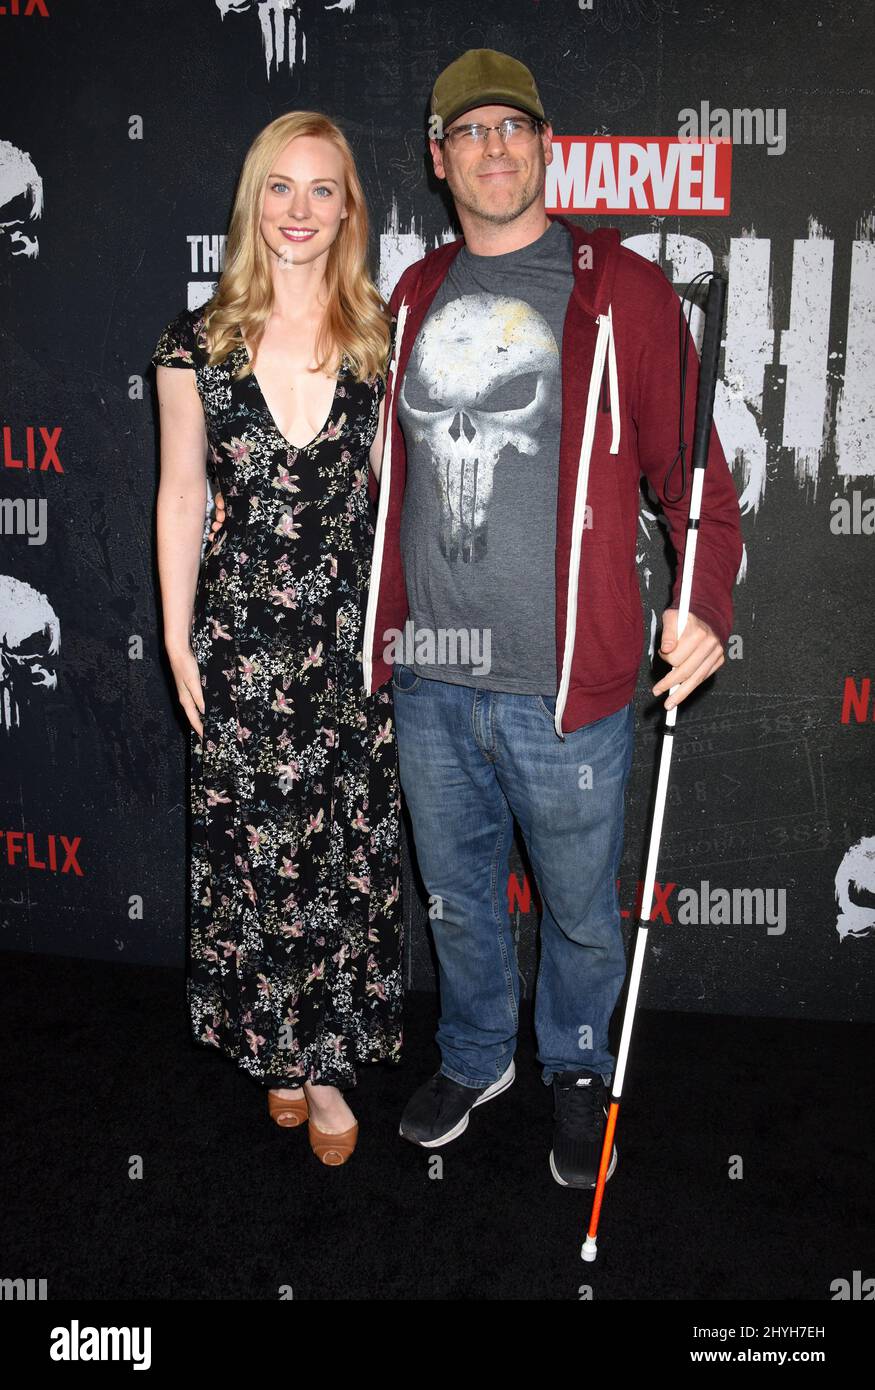 Deborah Ann Woll and E.J. Scott at Marvel's 'The Punisher' L.A. Special Screening held at the ArcLight Cinemas Hollywood Stock Photo